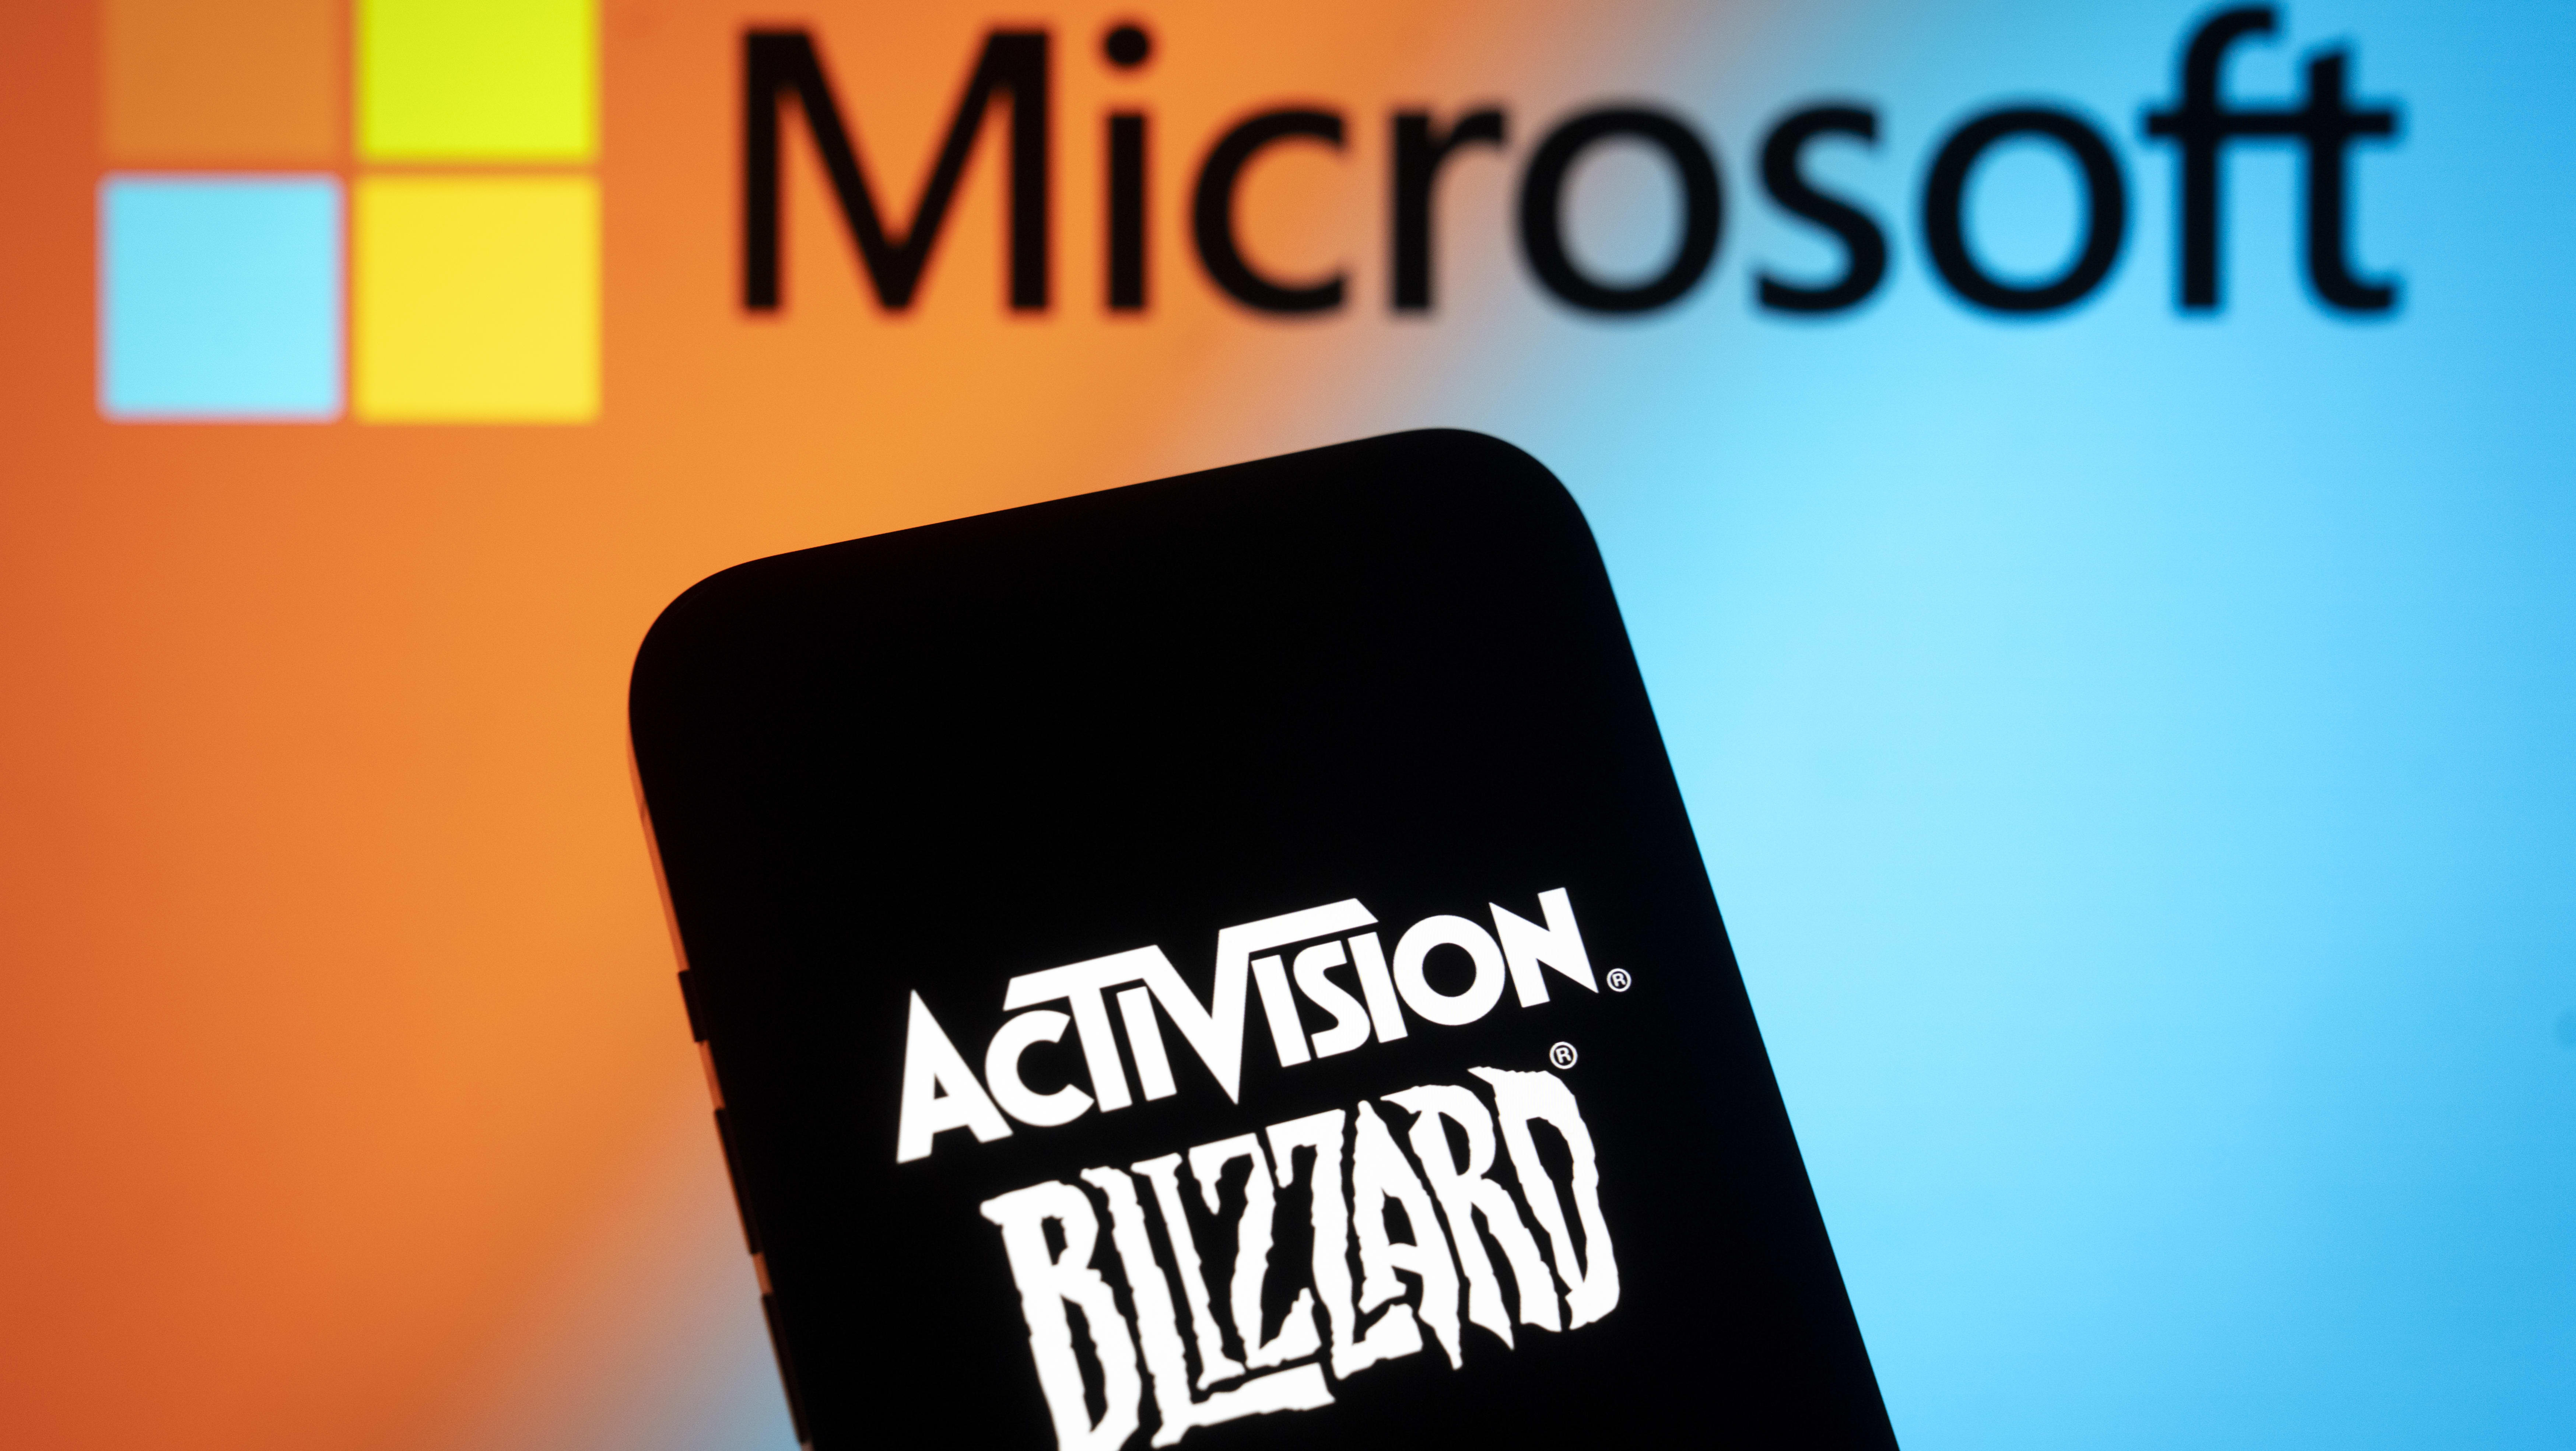 Activision Blizzard Stock Trading Halted Due to Probable